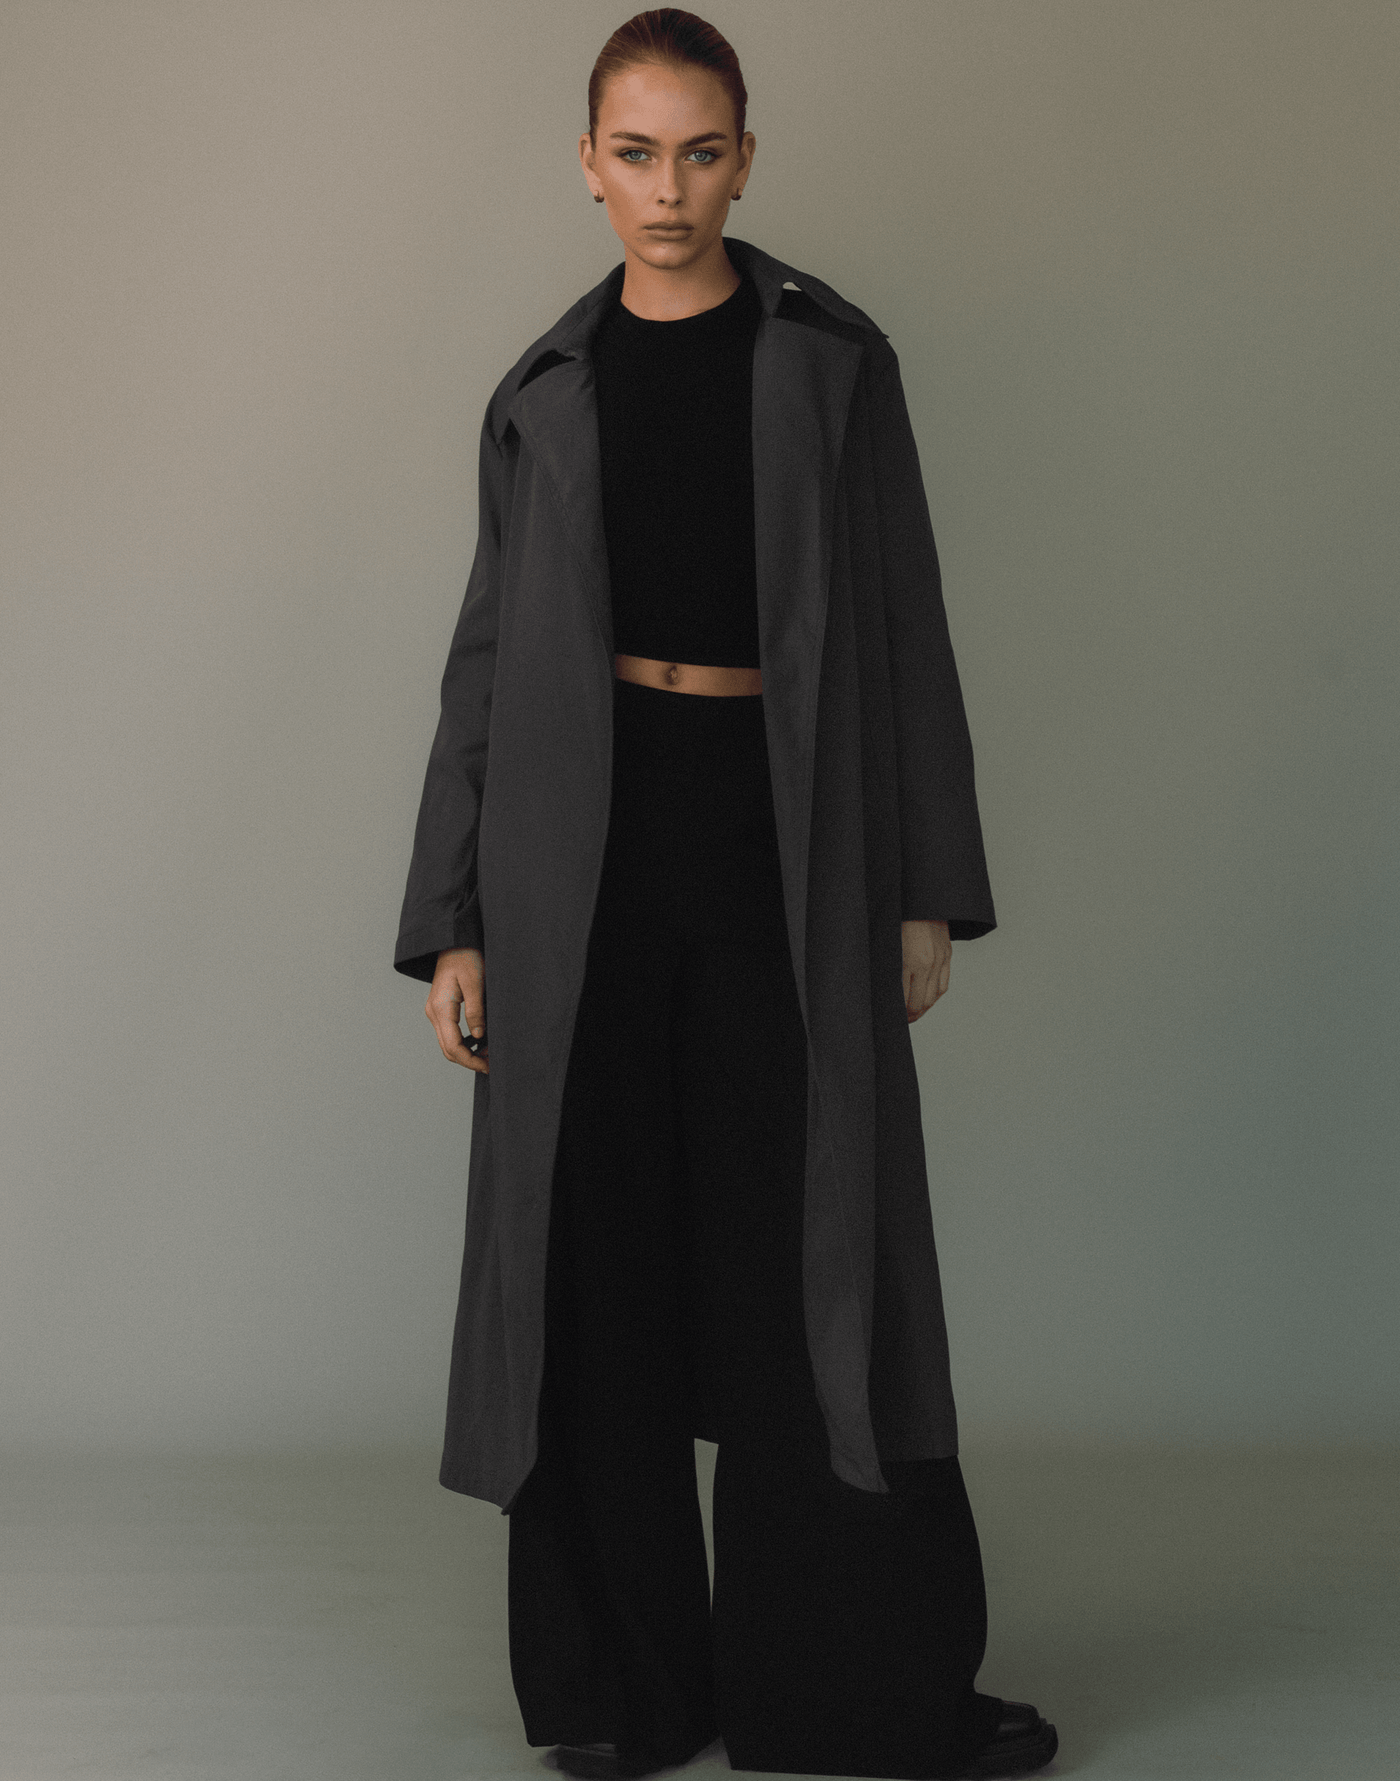 Portrait Trench Coat (Charcoal) - Long Tie-Up Jacket - Women's Outerwear - Charcoal Clothing